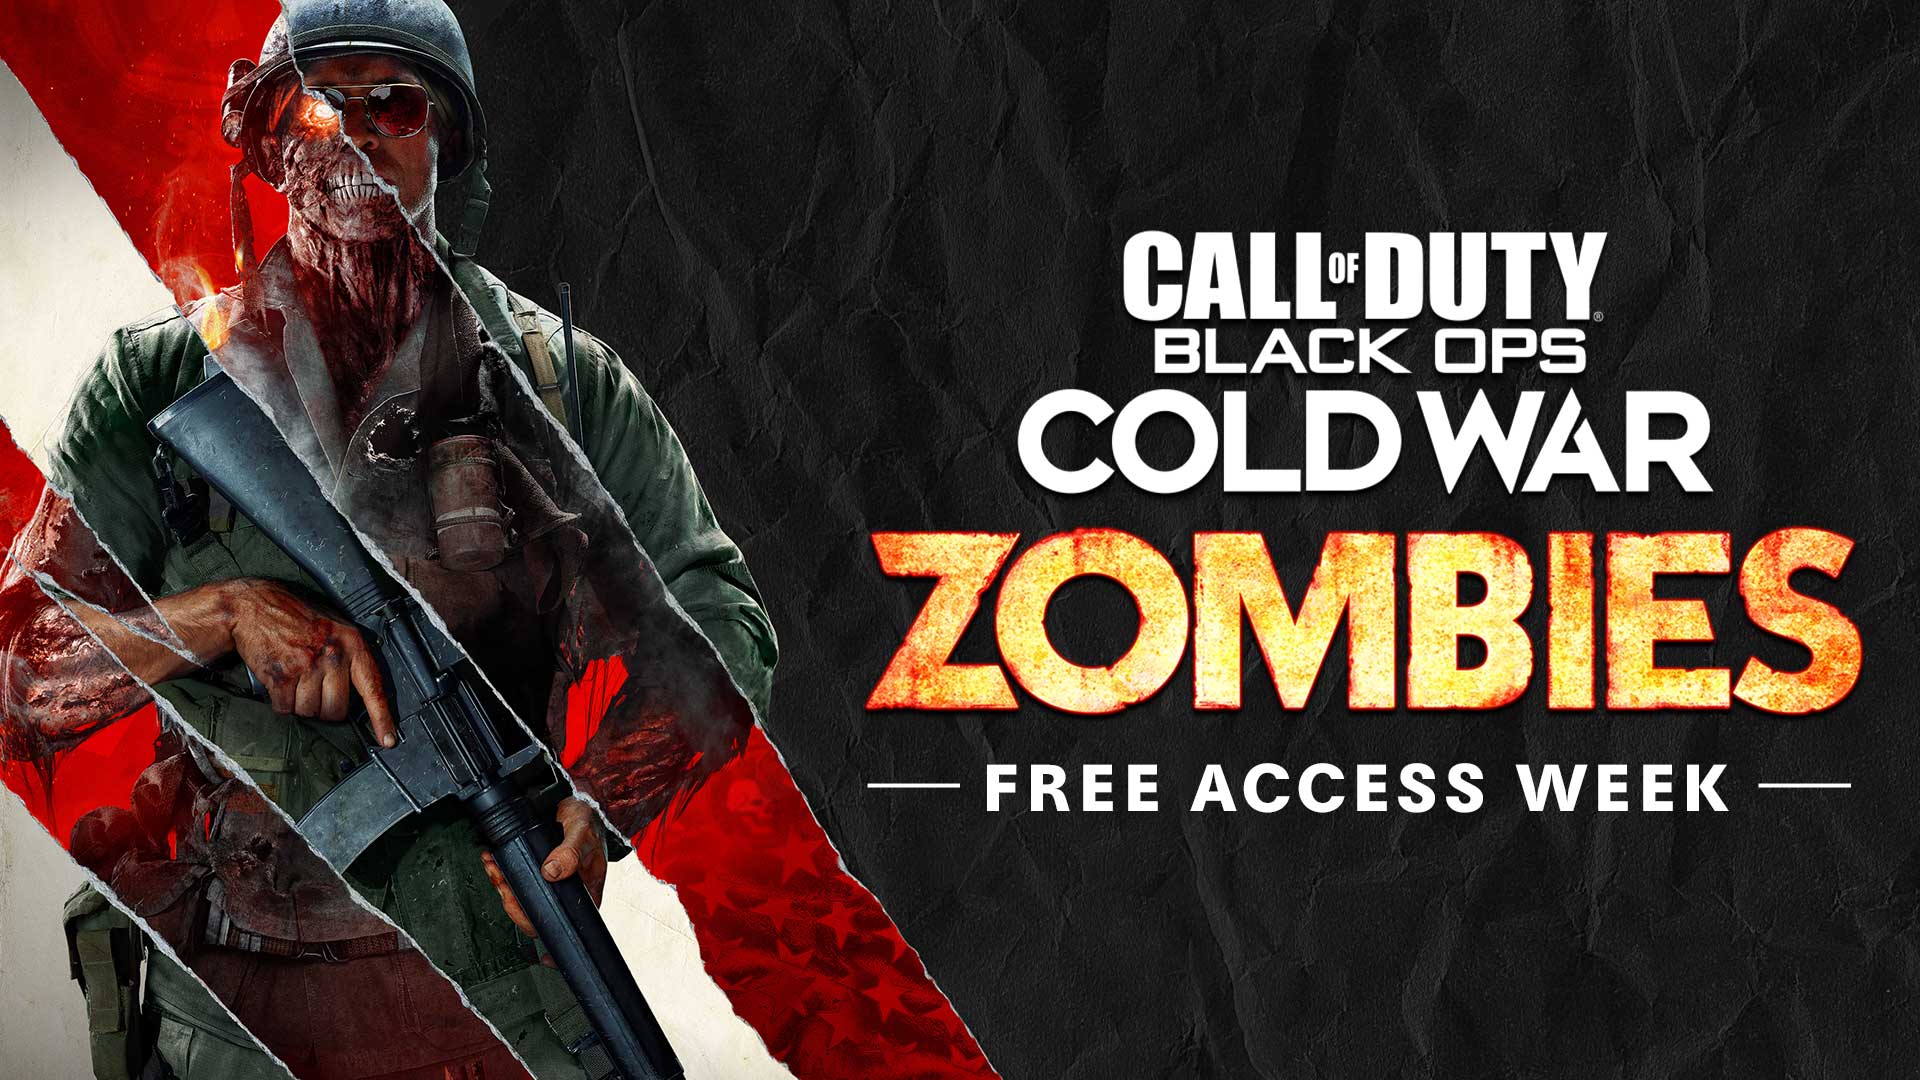 Experience the Next Chapter of Zombies Through Black Ops Cold War Zombies Free Access Week